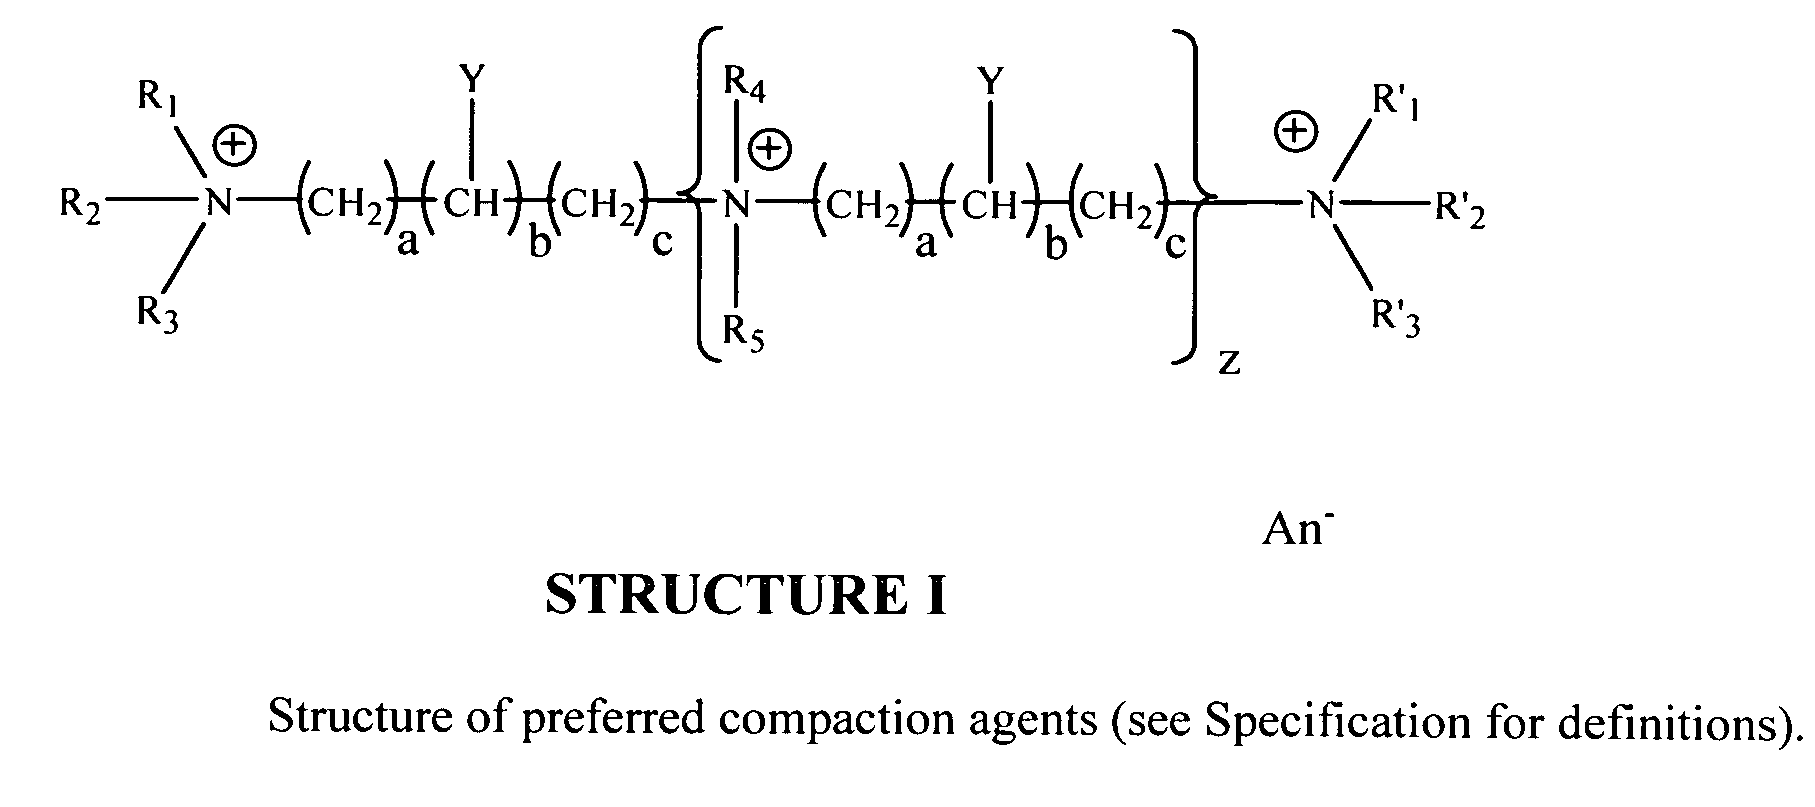 Apparatus, methods and compositions for biotechnical separations